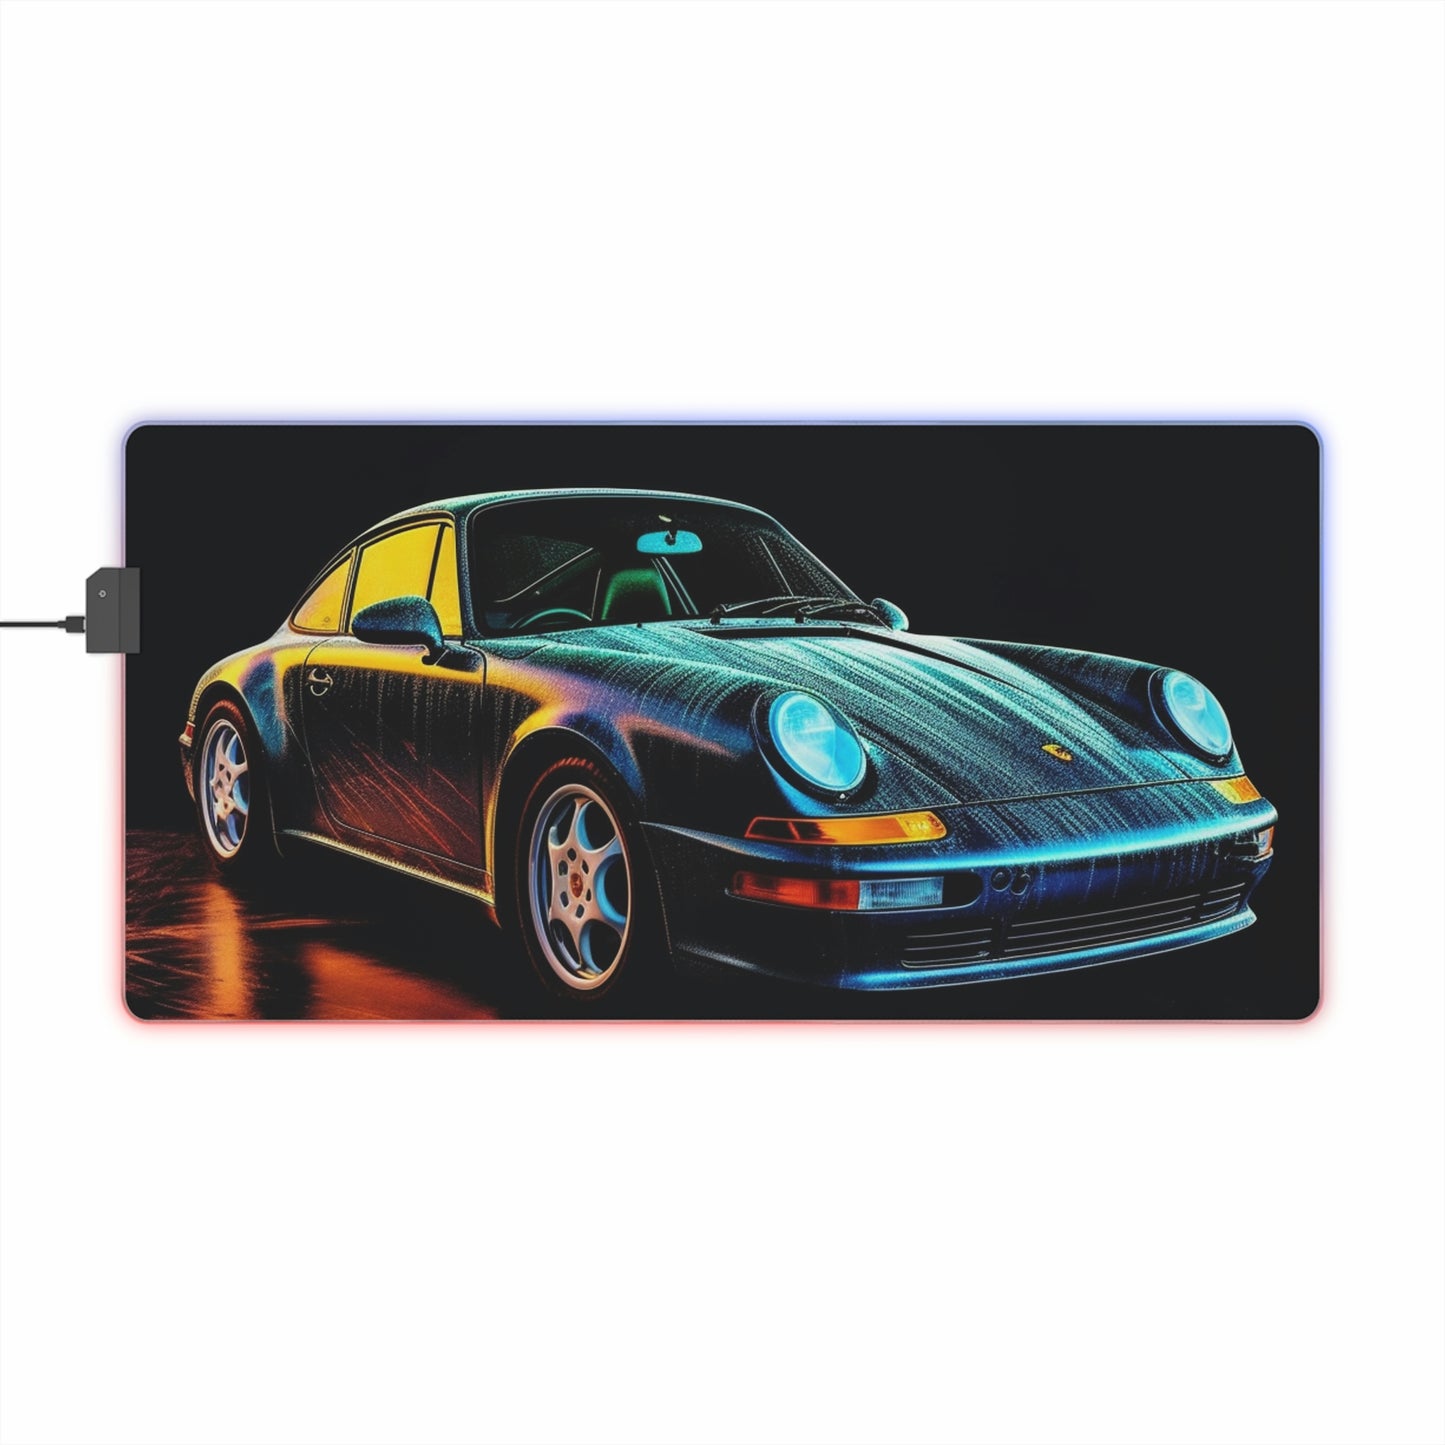 LED Gaming Mouse Pad Porsche 933 3